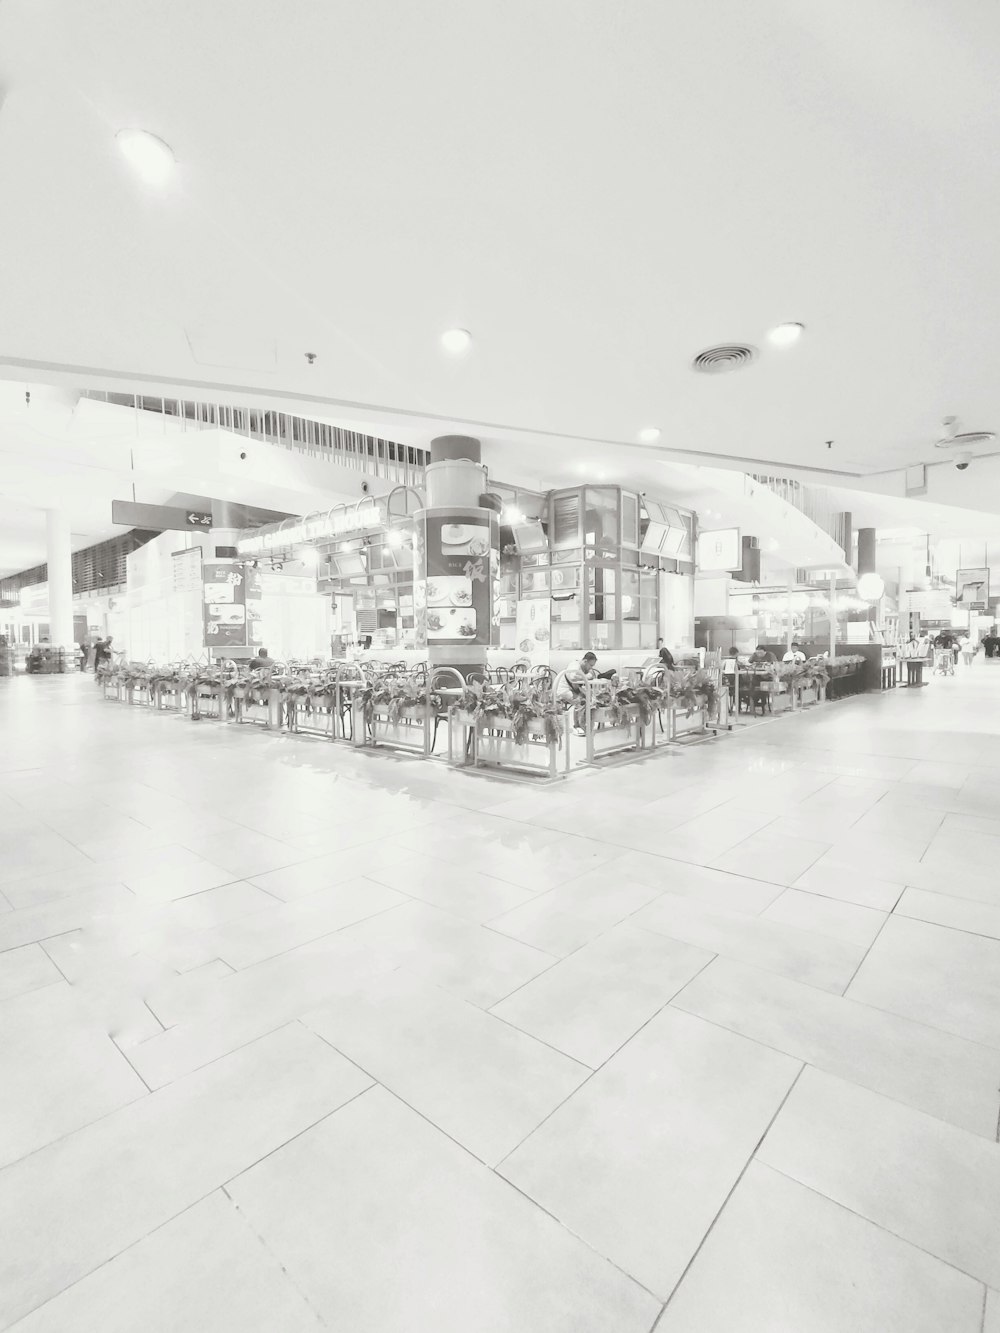 a black and white photo of a restaurant